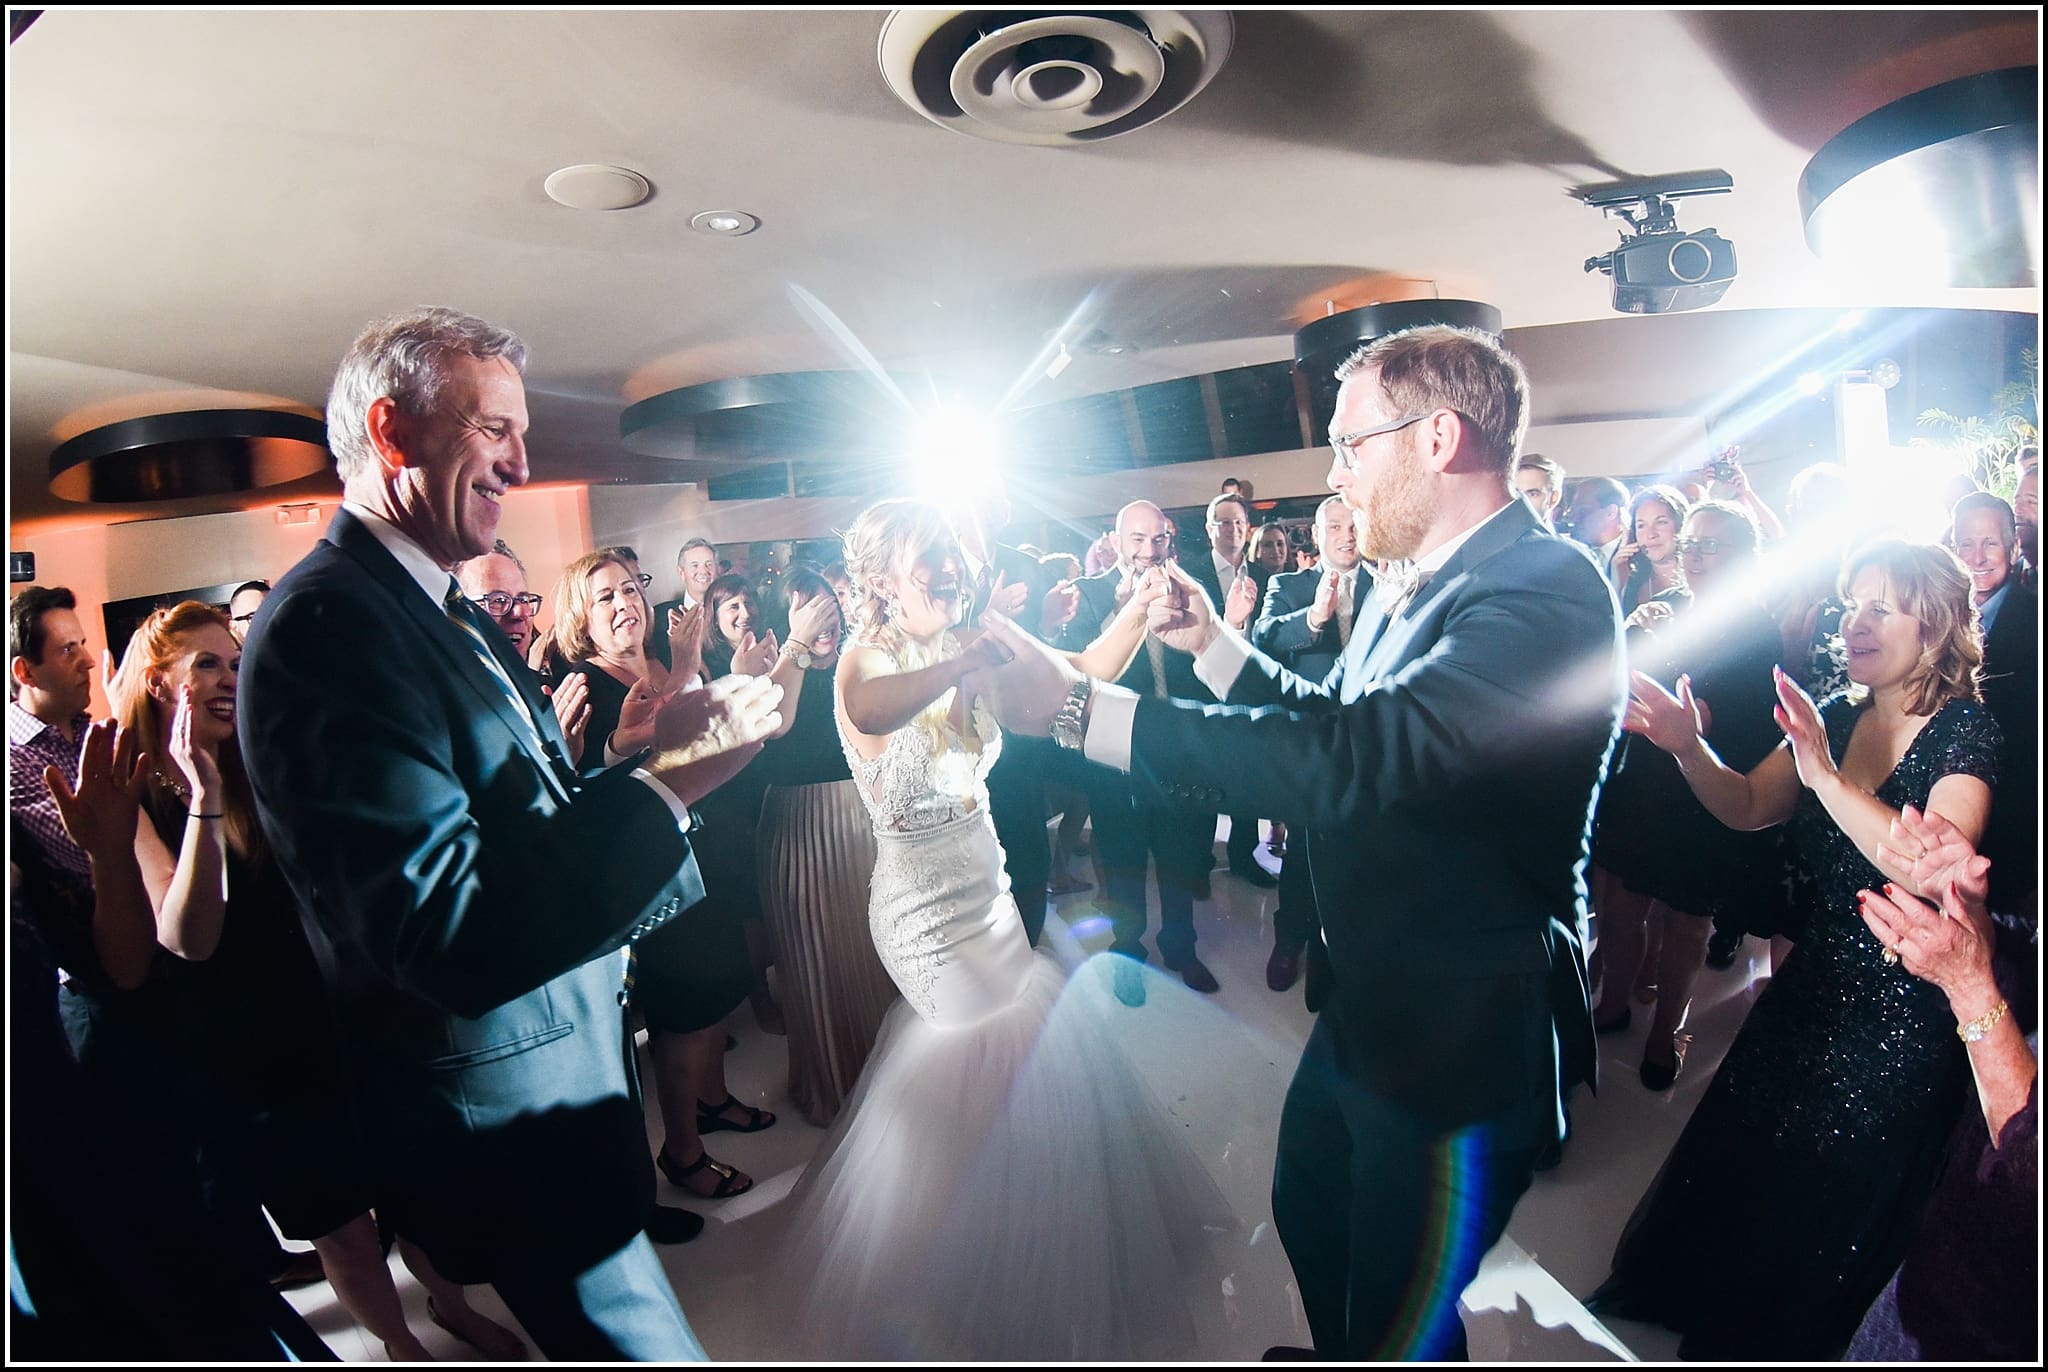  favorite wedding images 2016, wedding photos from 2016, our favorite wedding photos, spencers wedding photography, palm springs wedding reception